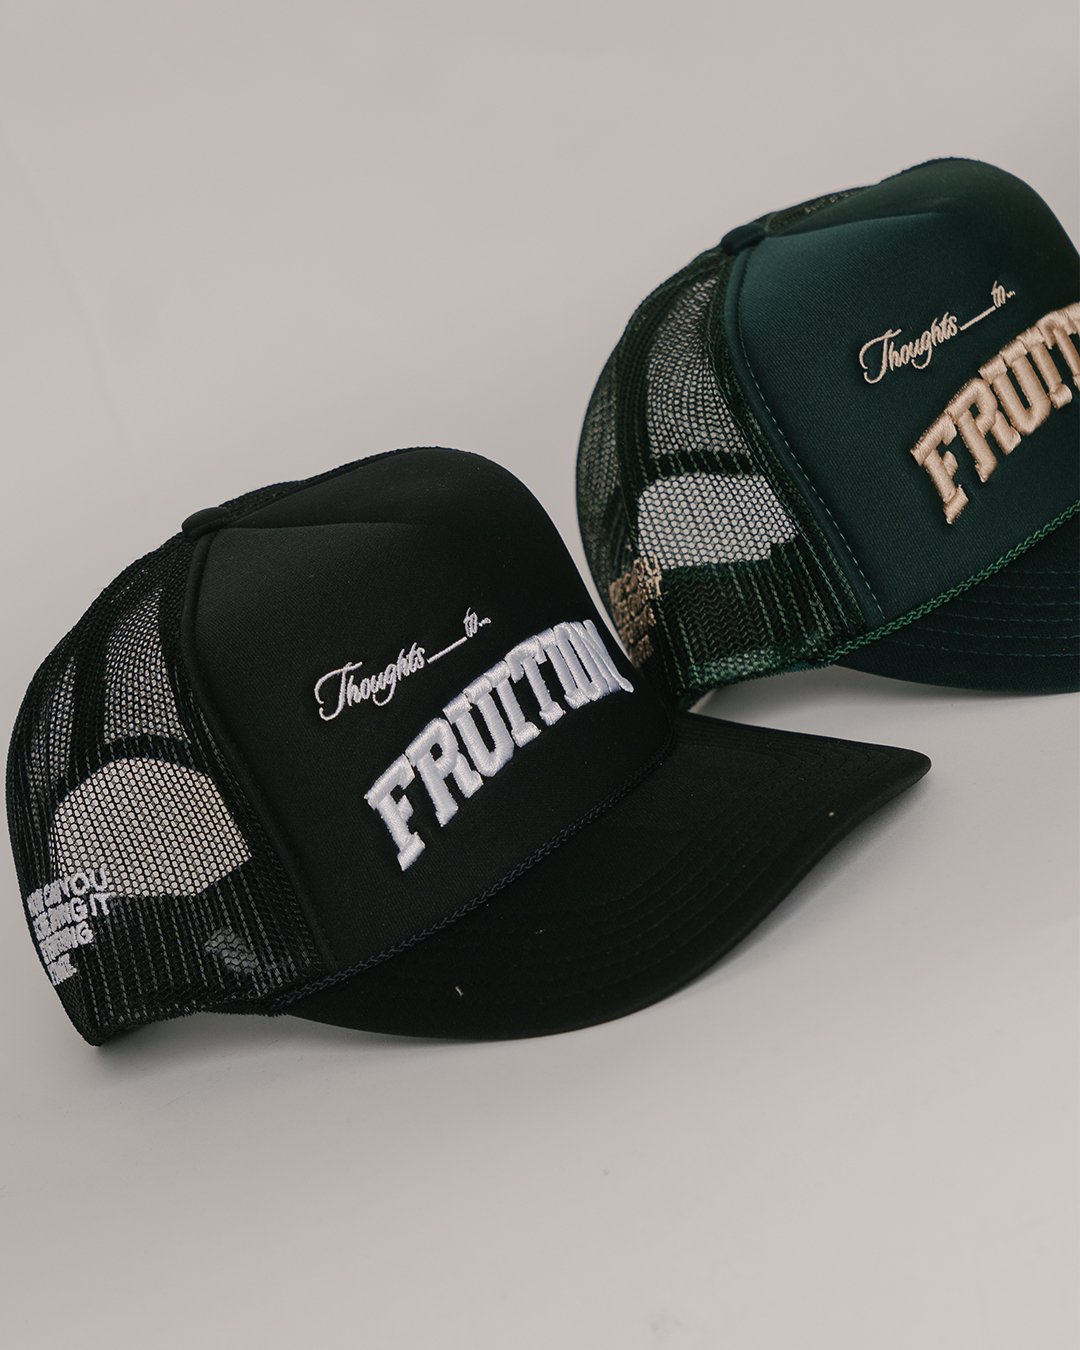 Fruition Black 5 Panel Trucker Hat - trainofthoughtcollective